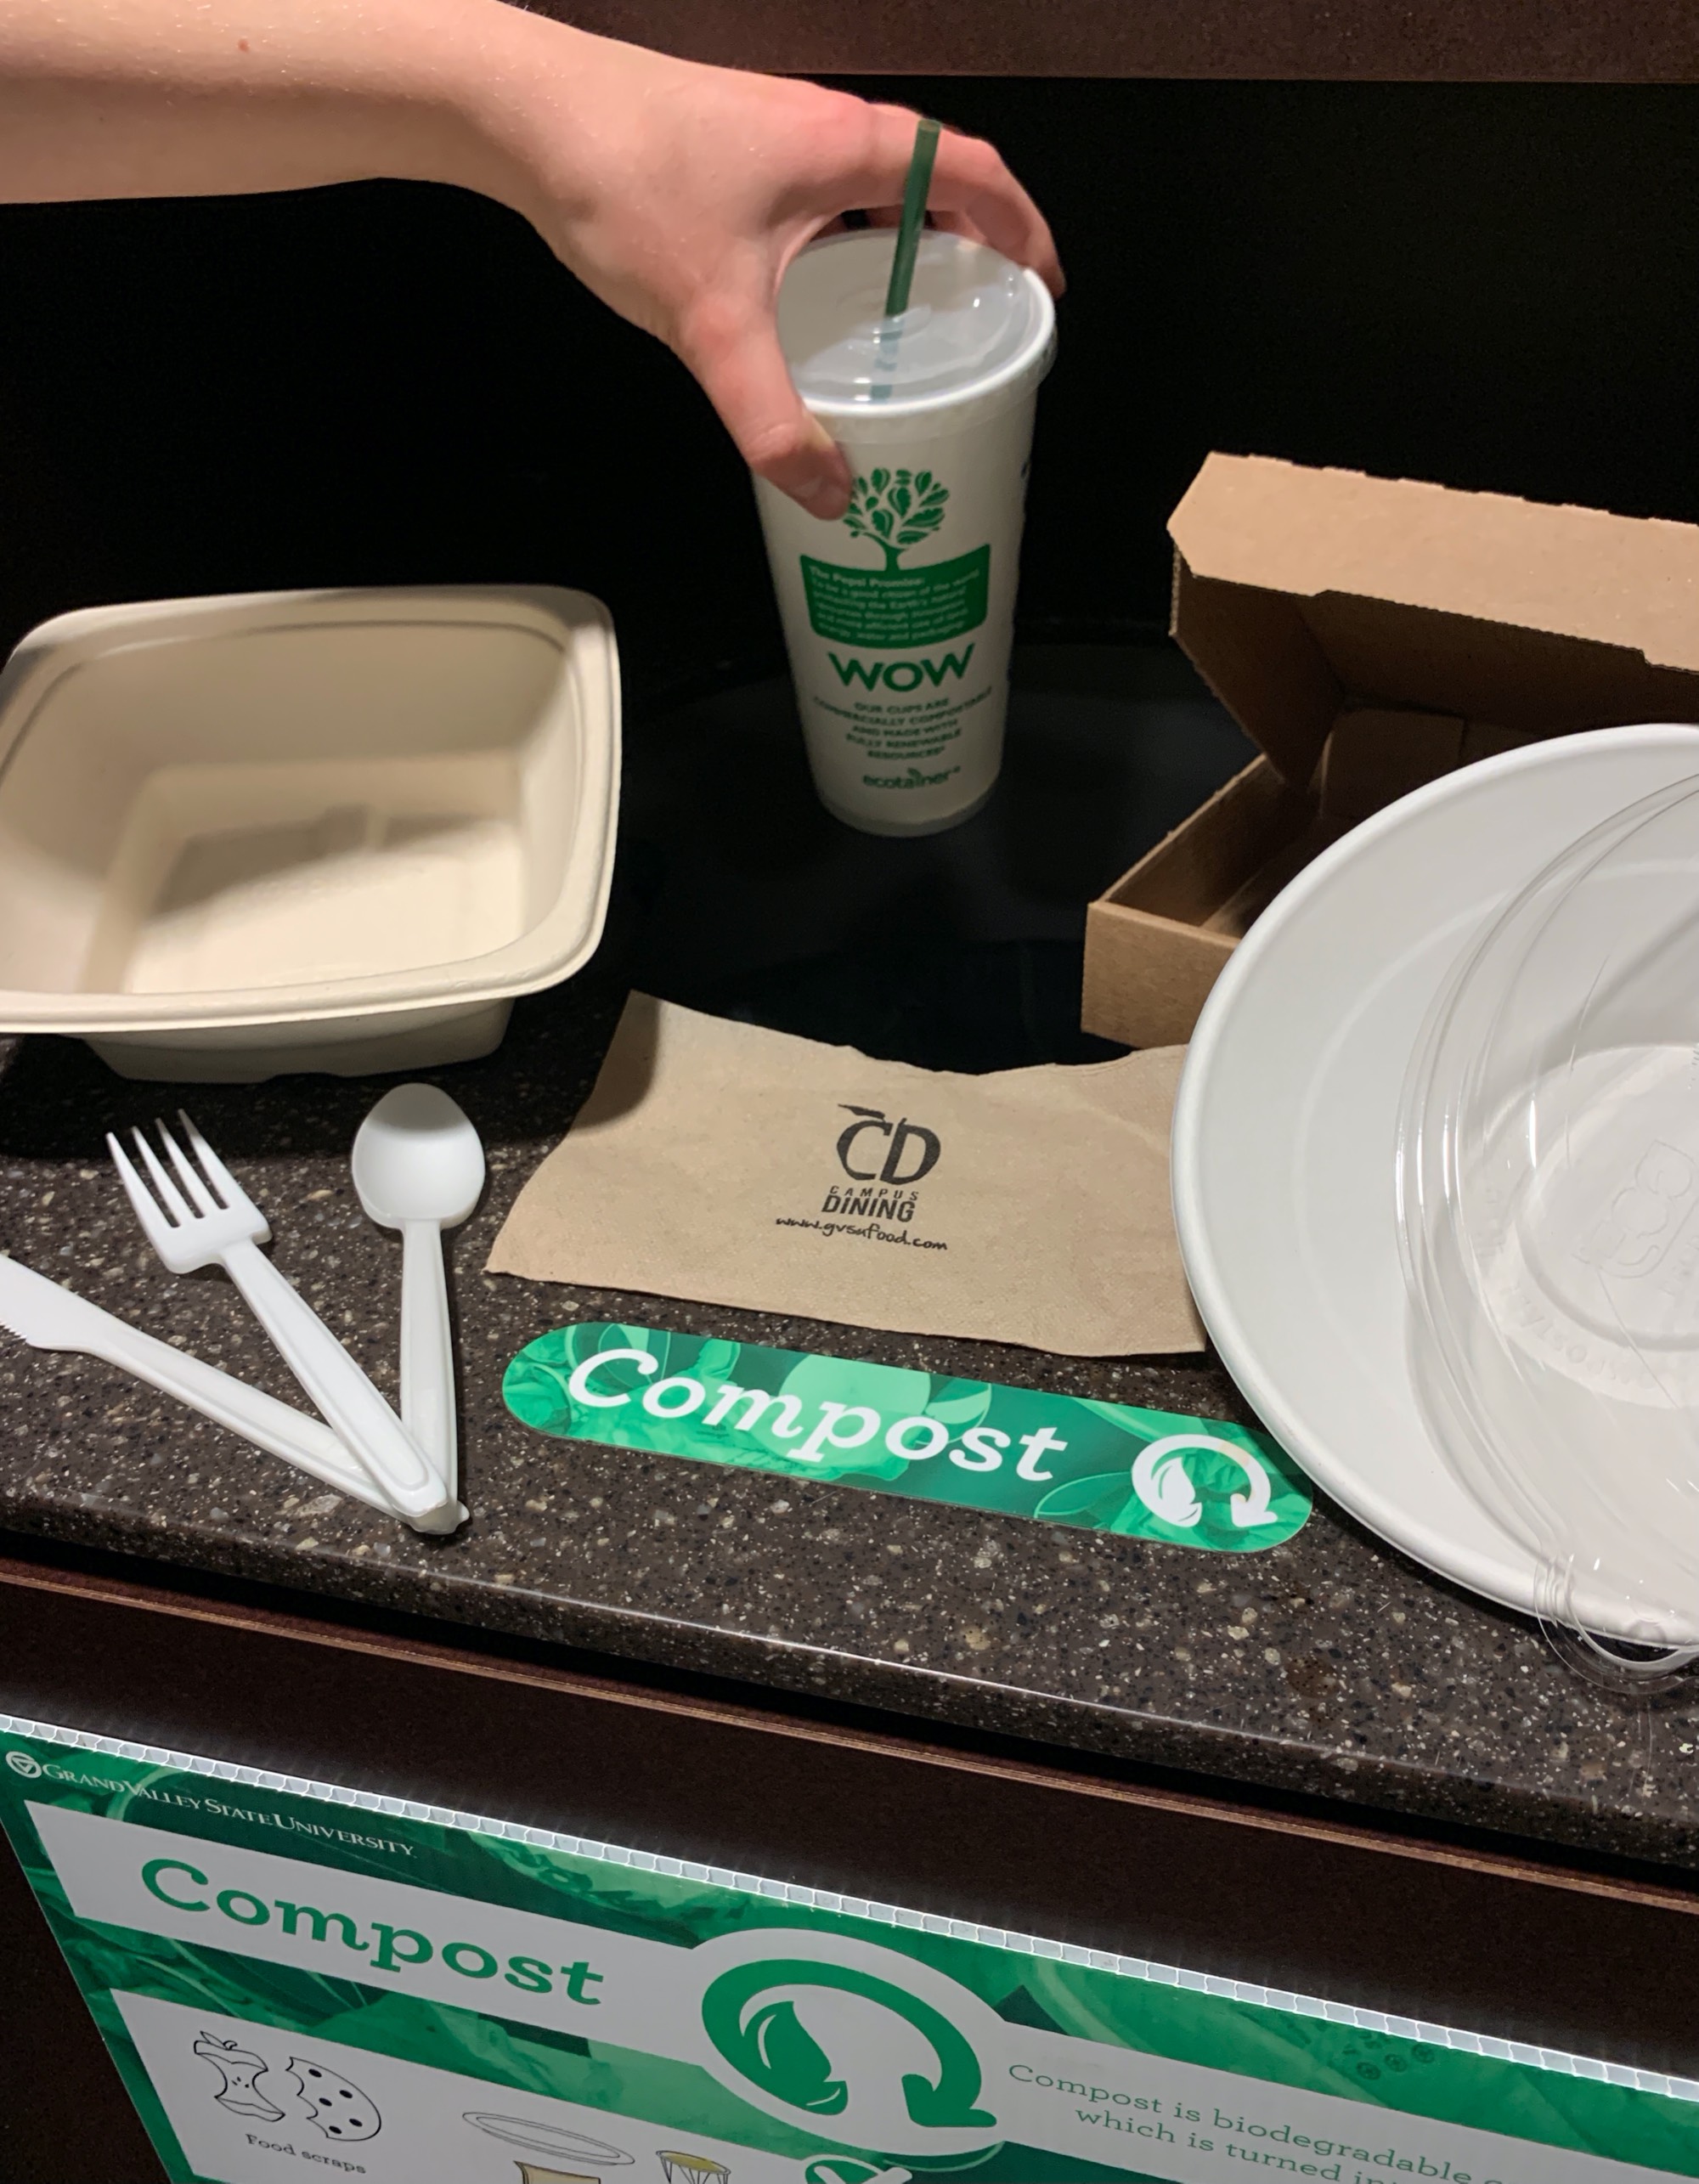 This shows all the compostable materials